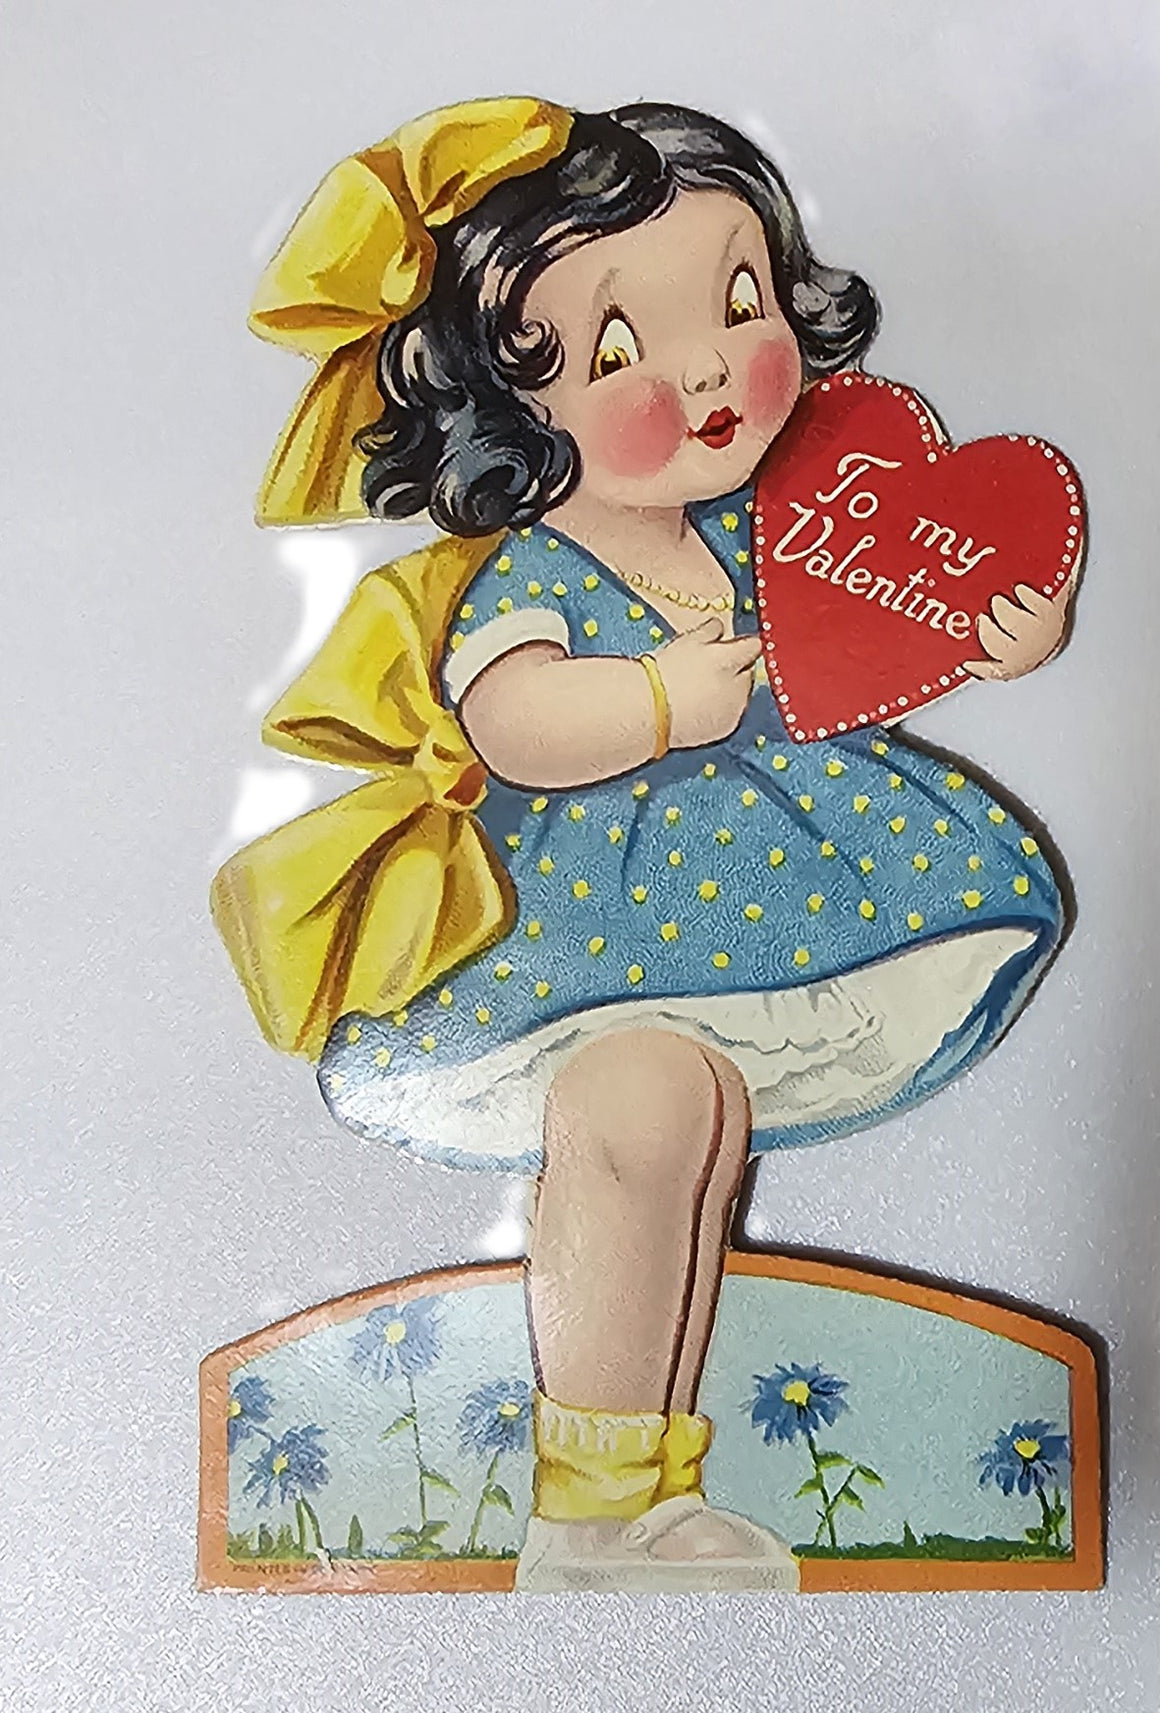 Vintage Die Cut Valentine Card Little Girl in Blue Polka Dot Dress with Yellow Ribbons Holding Red Heart